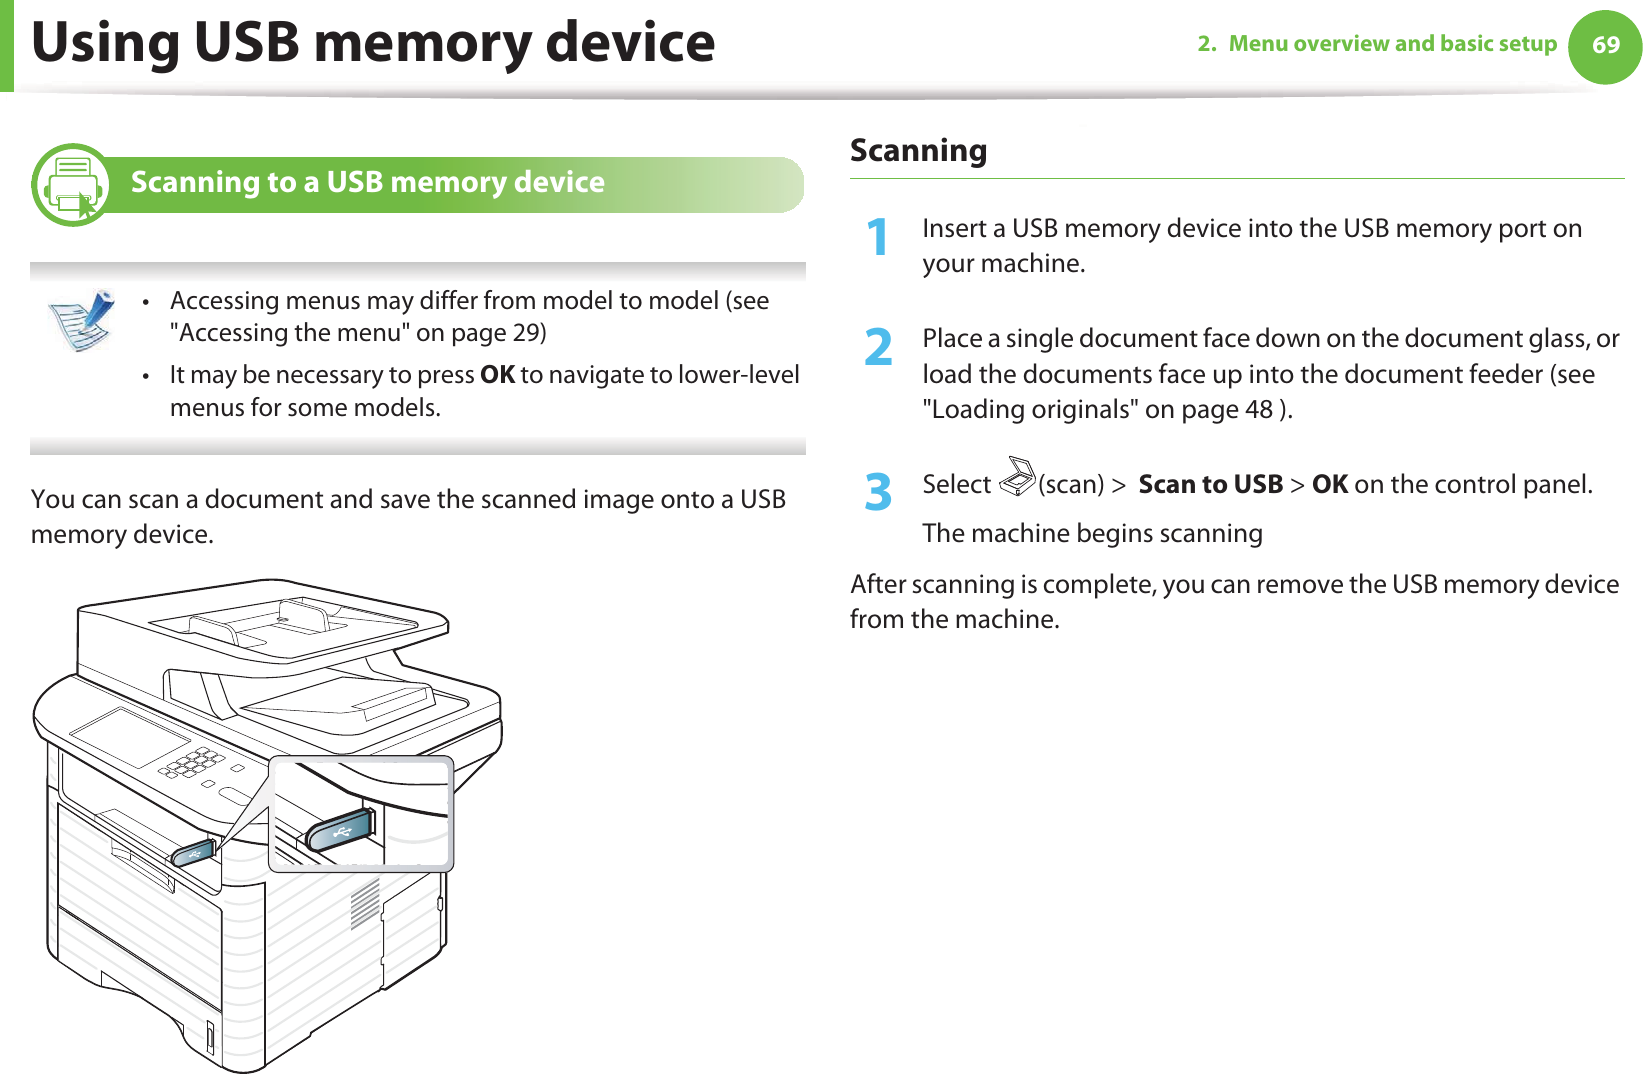 Using USB memory device 692. Menu overview and basic setup24 Scanning to a USB memory device • Accessing menus may differ from model to model (see &quot;Accessing the menu&quot; on page 29)• It may be necessary to press OK to navigate to lower-level menus for some models. You can scan a document and save the scanned image onto a USB memory device.Scanning1Insert a USB memory device into the USB memory port on your machine.2  Place a single document face down on the document glass, or load the documents face up into the document feeder (see &quot;Loading originals&quot; on page 48 ).3  Select (scan) &gt;  Scan to USB &gt; OK on the control panel.The machine begins scanningAfter scanning is complete, you can remove the USB memory device from the machine.